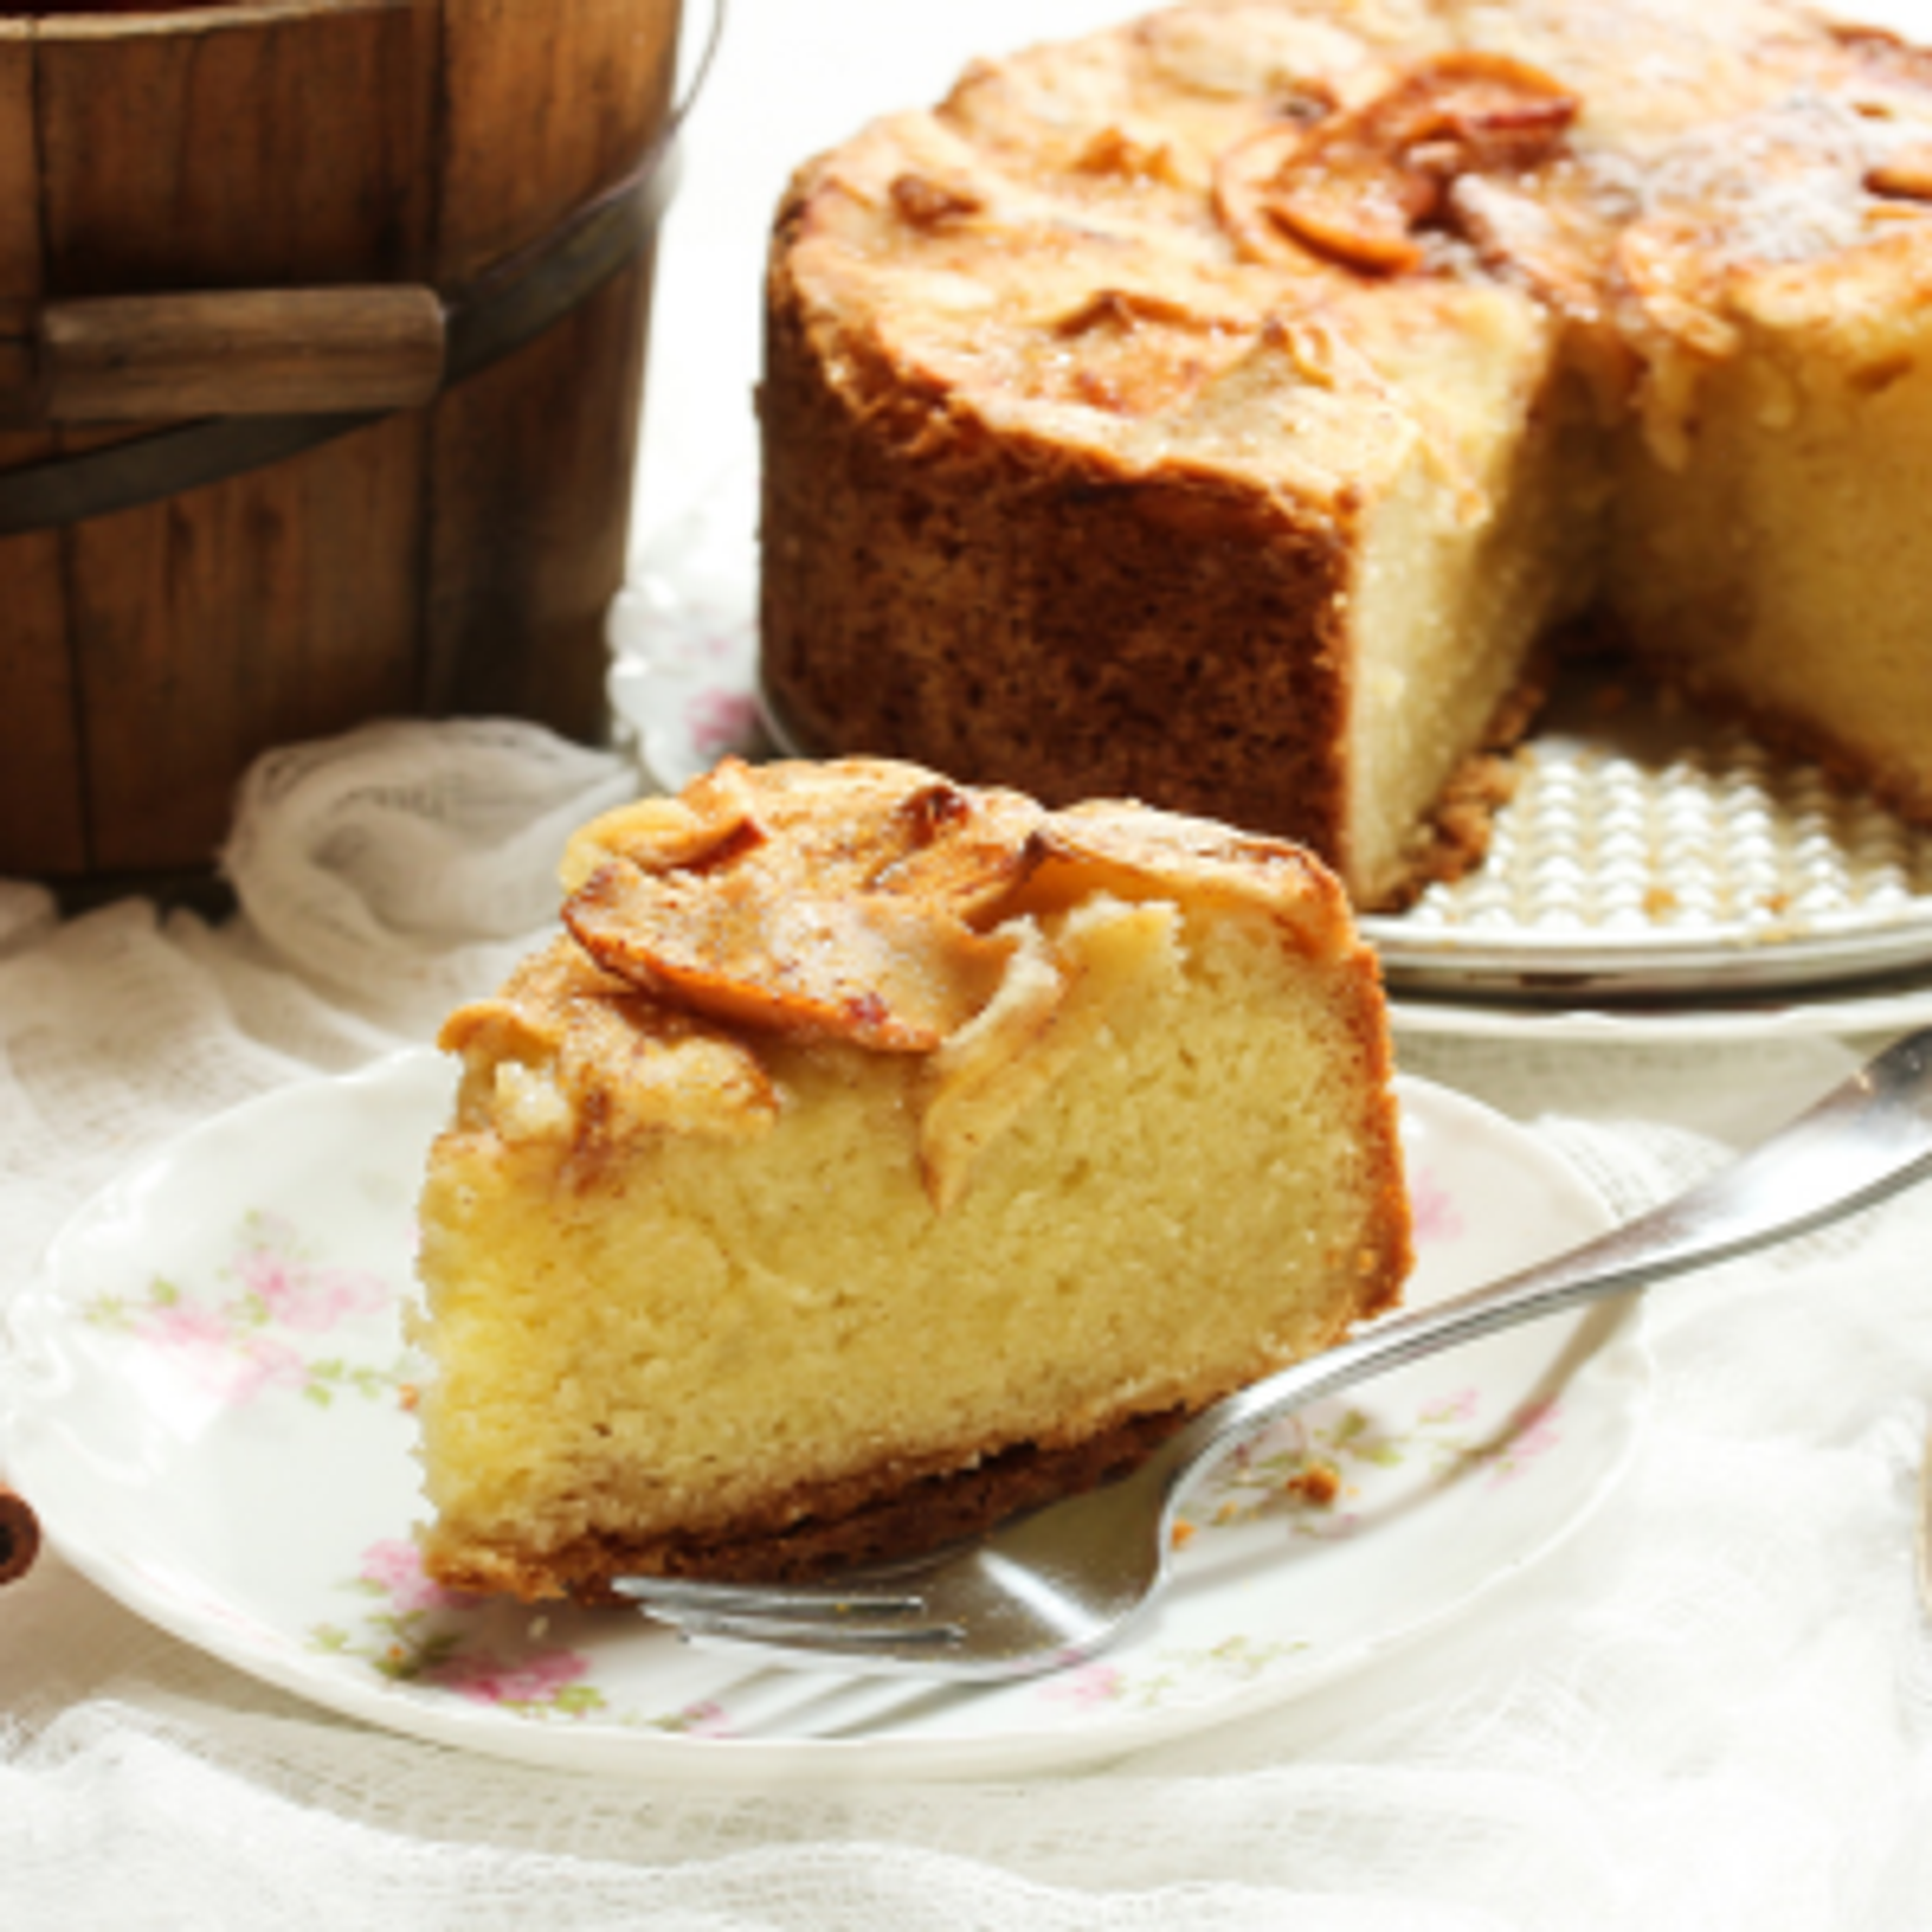 A sweet and delicious slice of Irish Apple Cake to finish off!